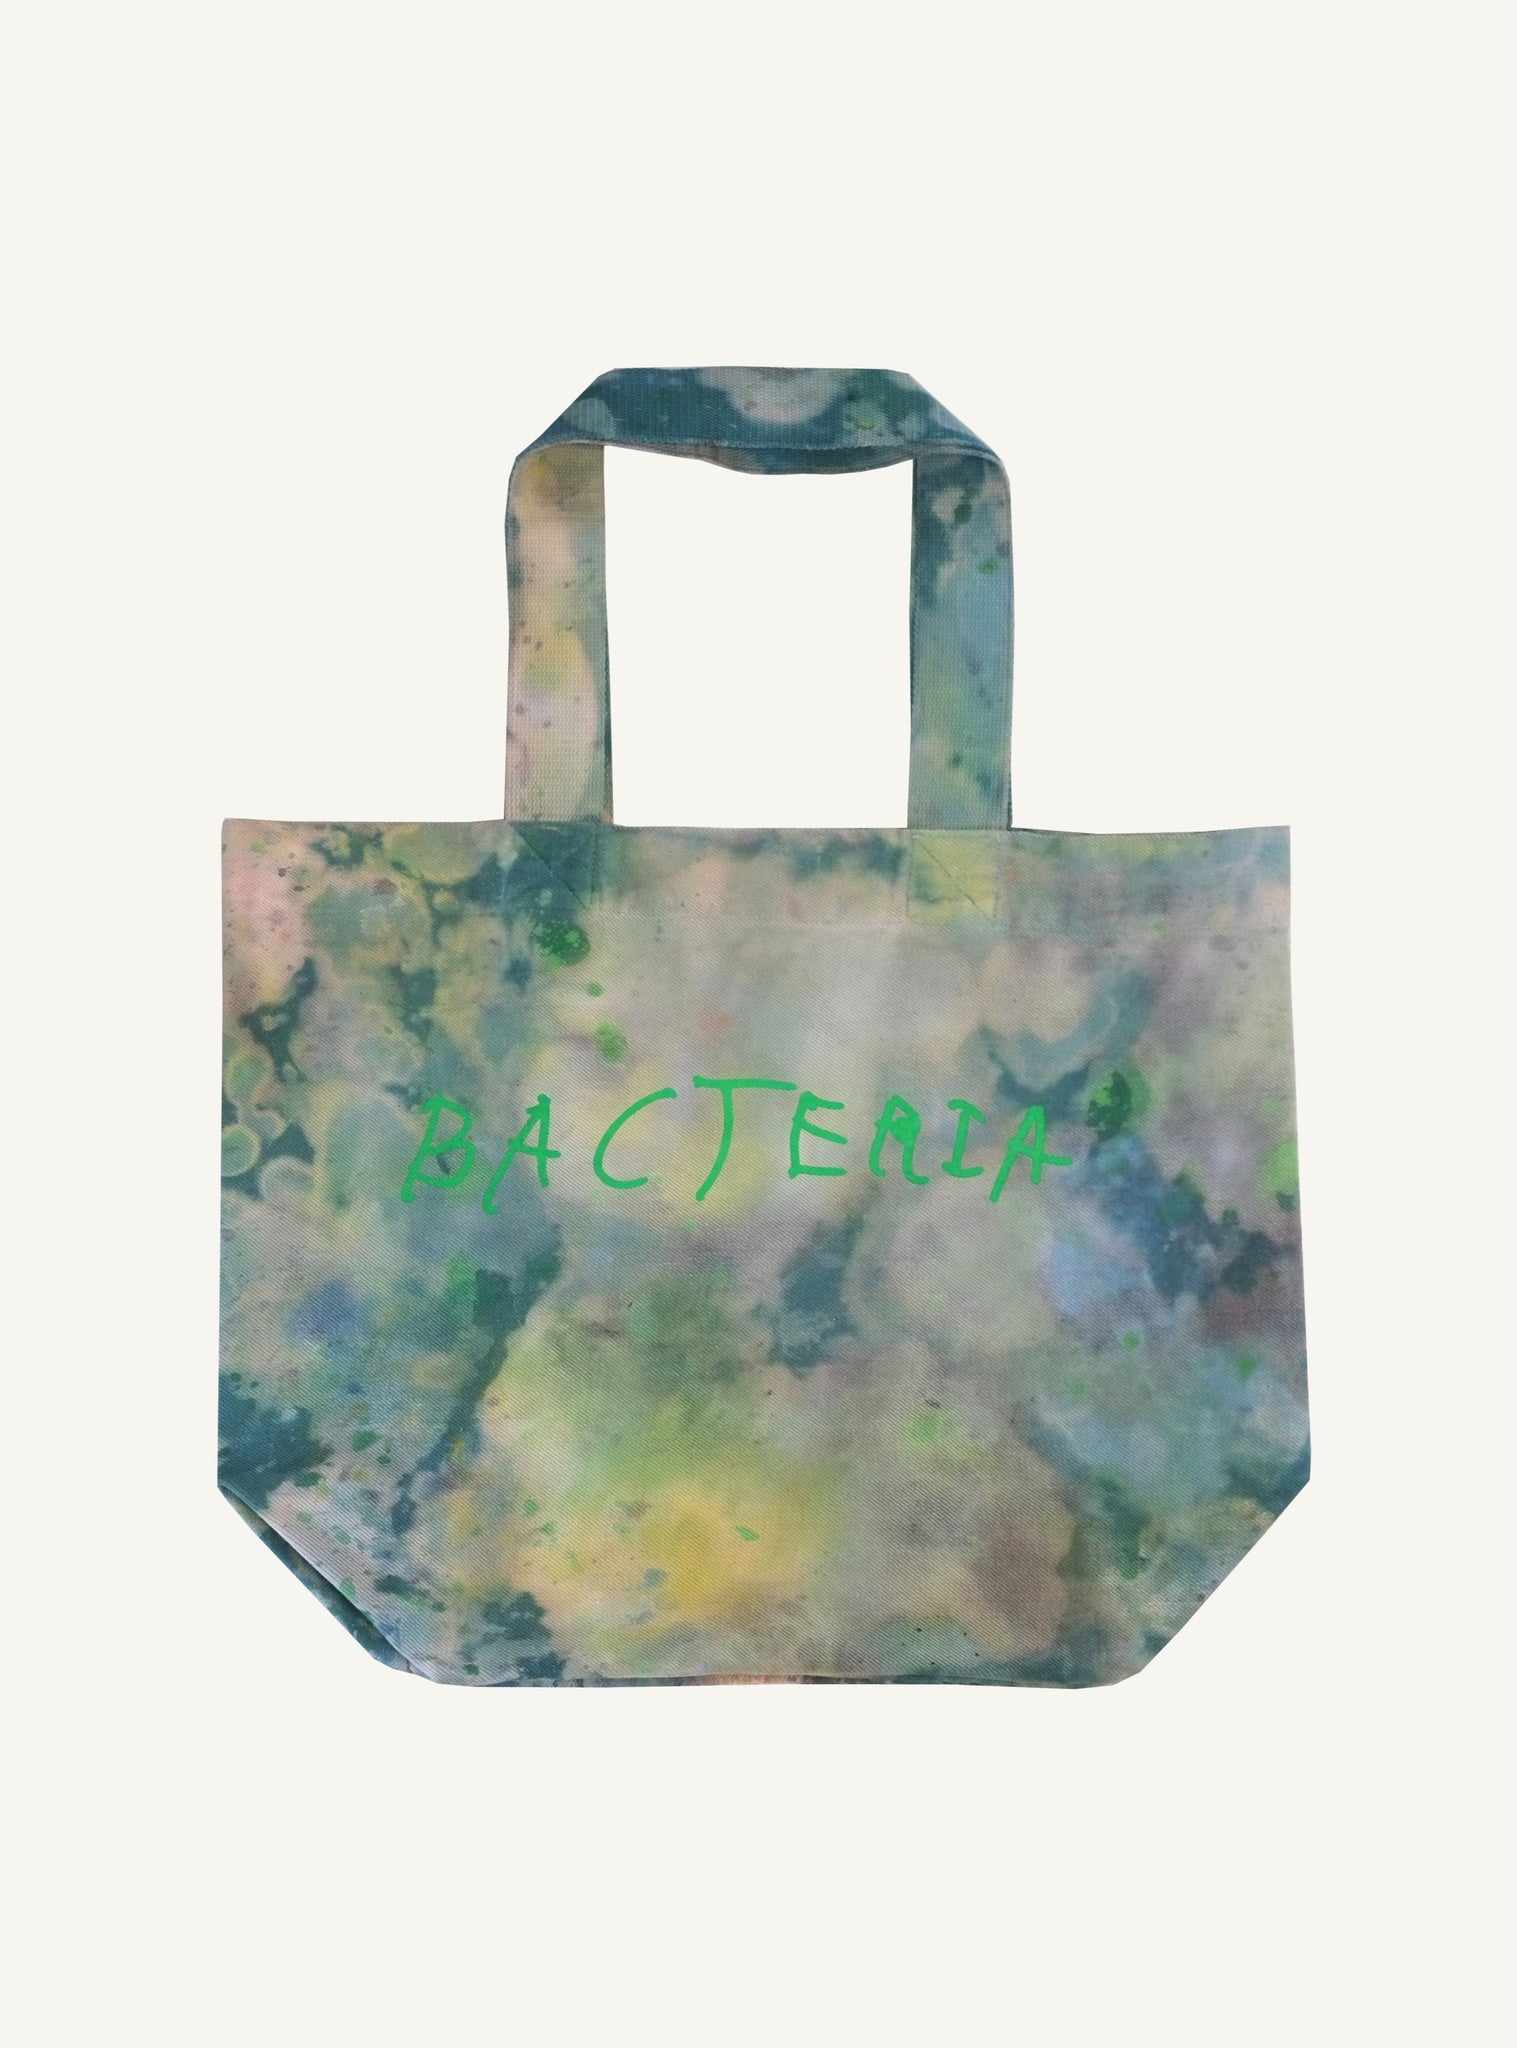 BACTERIA X ZAROYKO — Many Moments Even Memories of Moments That Have Been Taken Away Tote